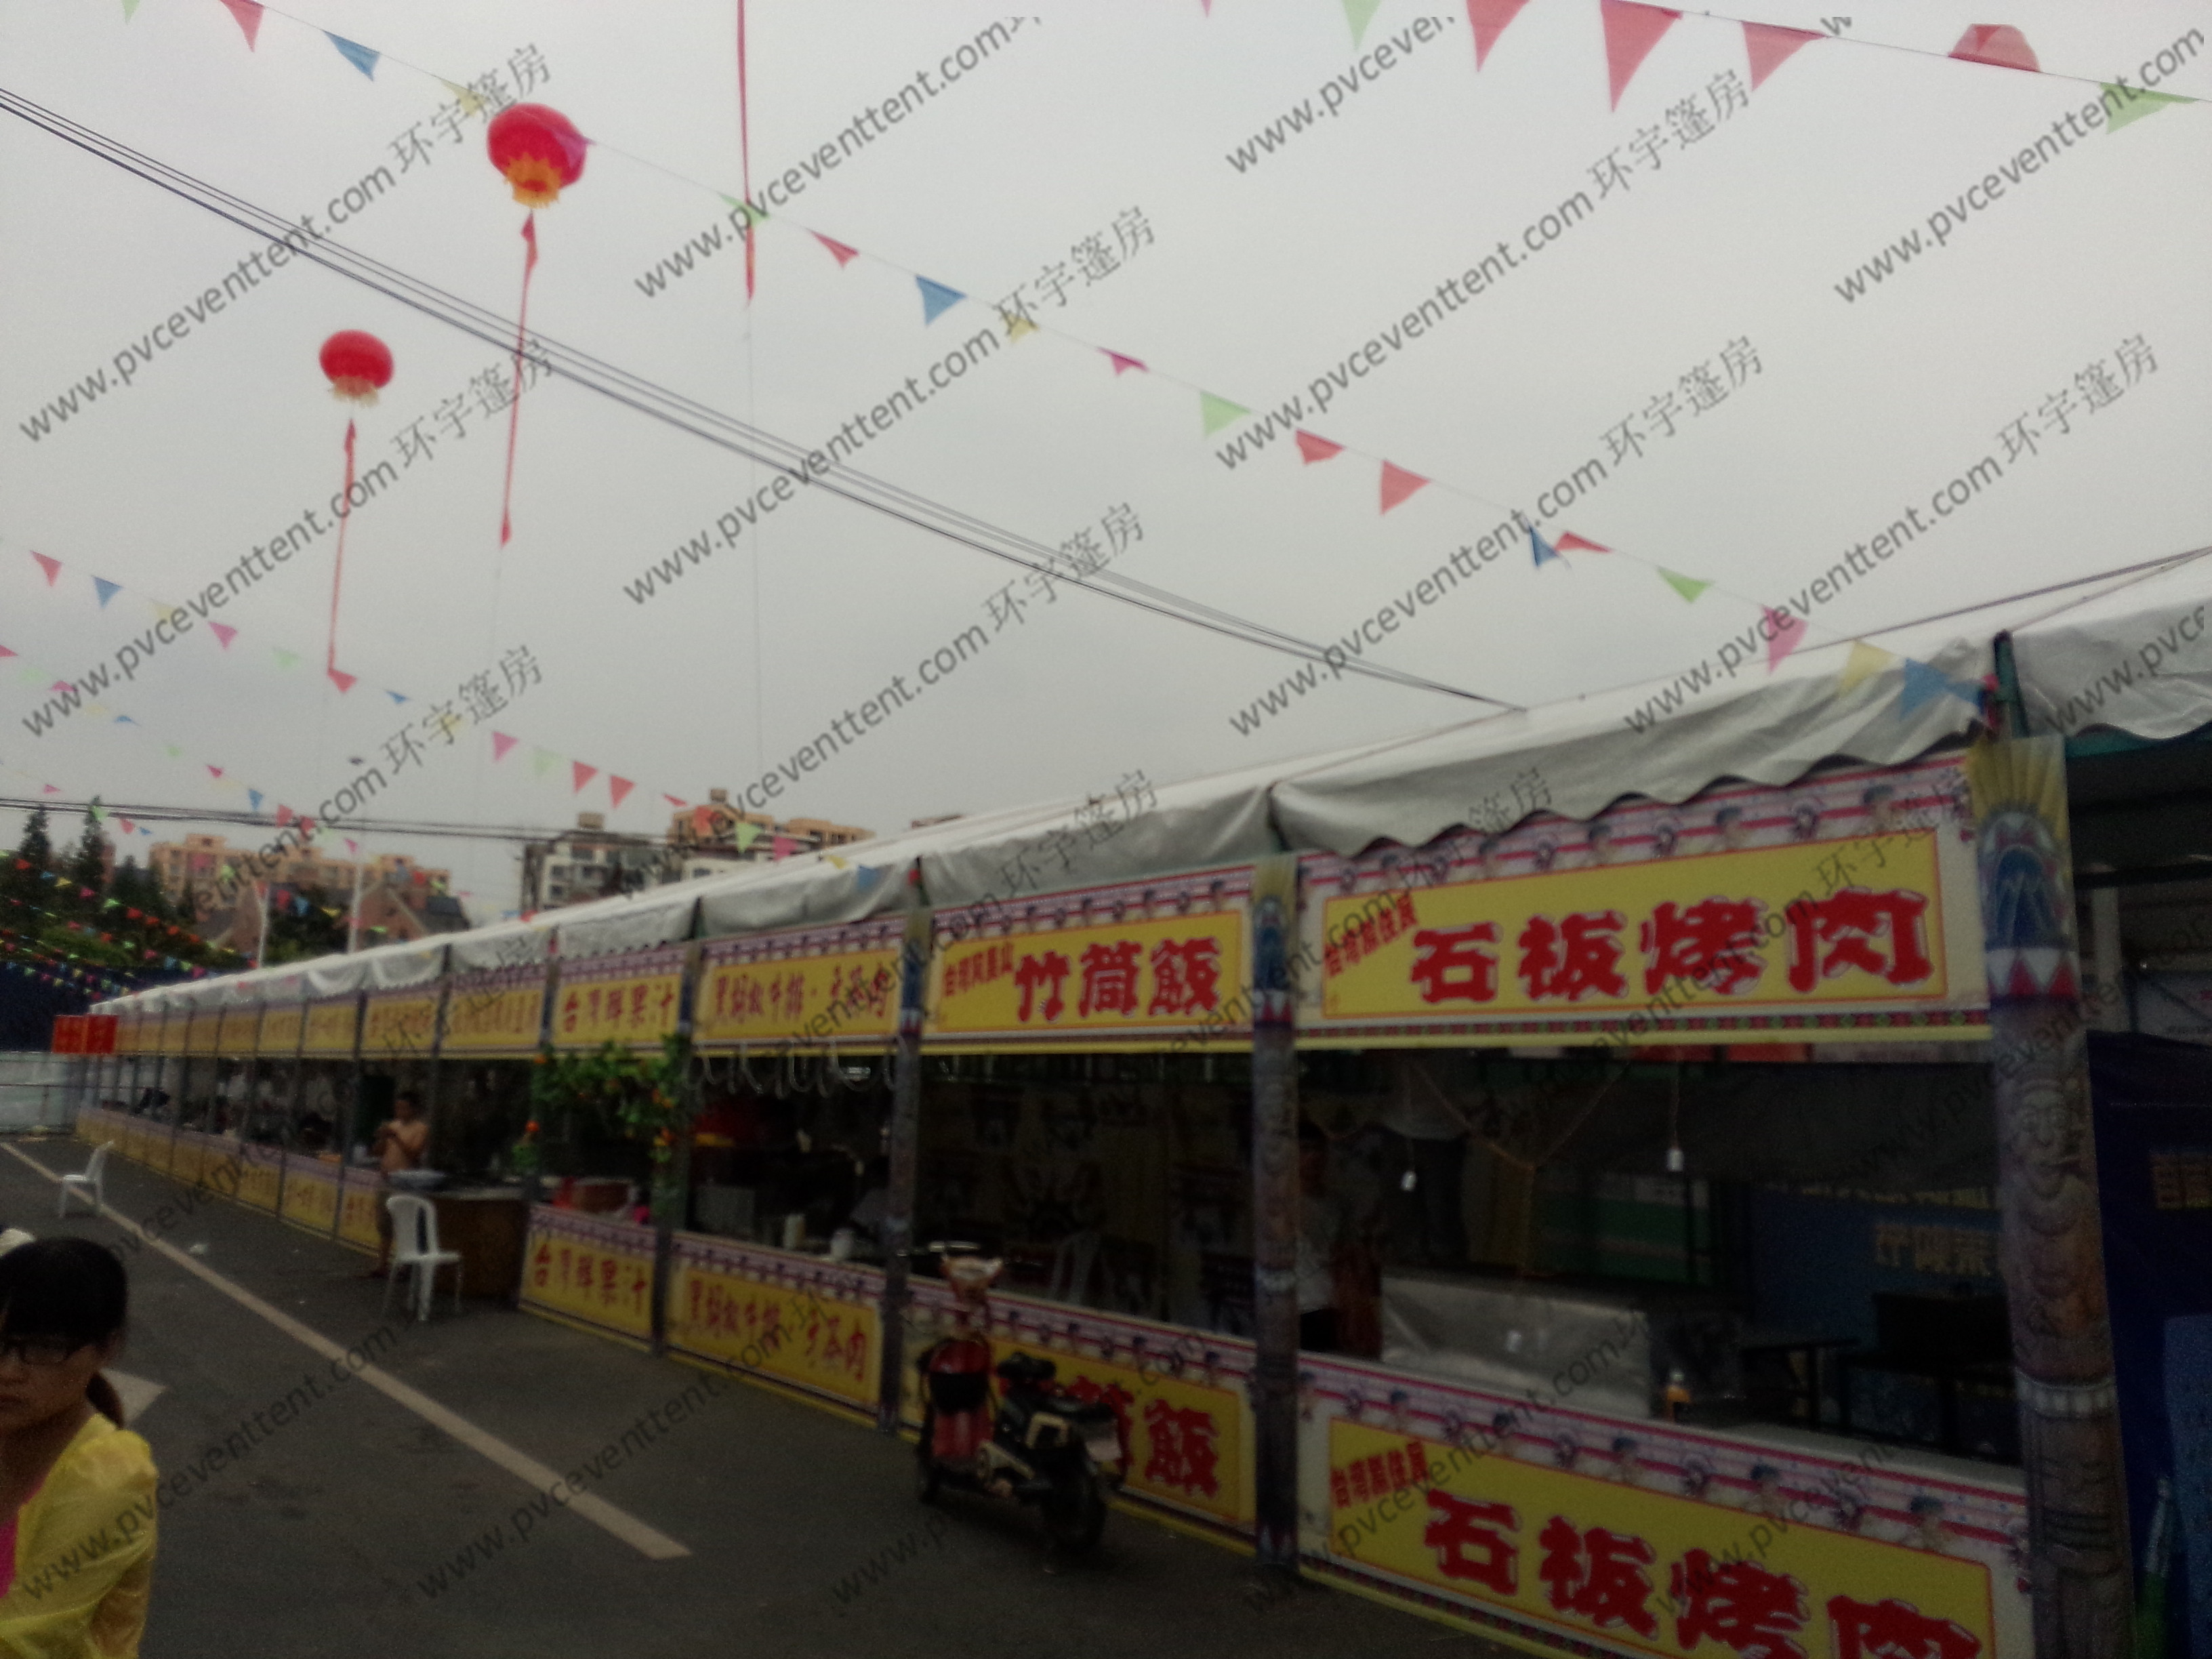 40m Width Dome Big Event Tents For Special Snack Food Festival Celebration